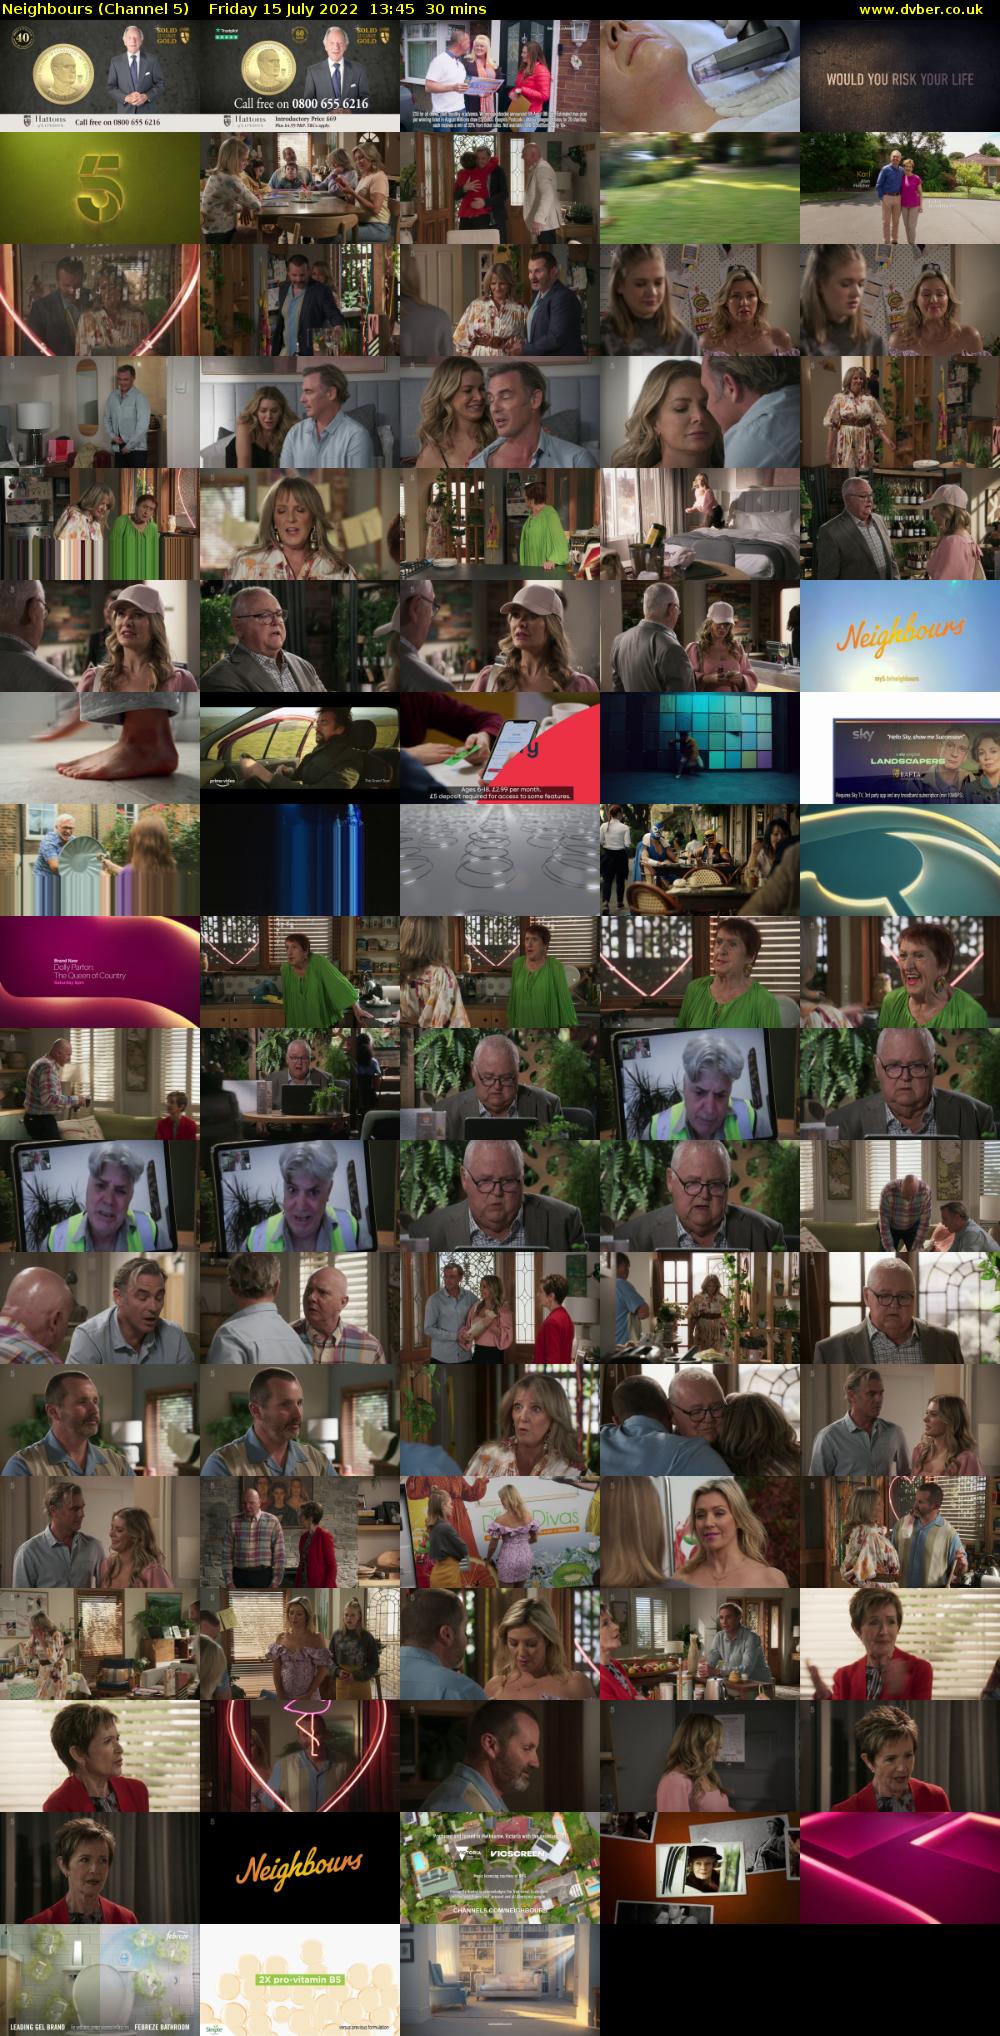 Neighbours (Channel 5) Friday 15 July 2022 13:45 - 14:15